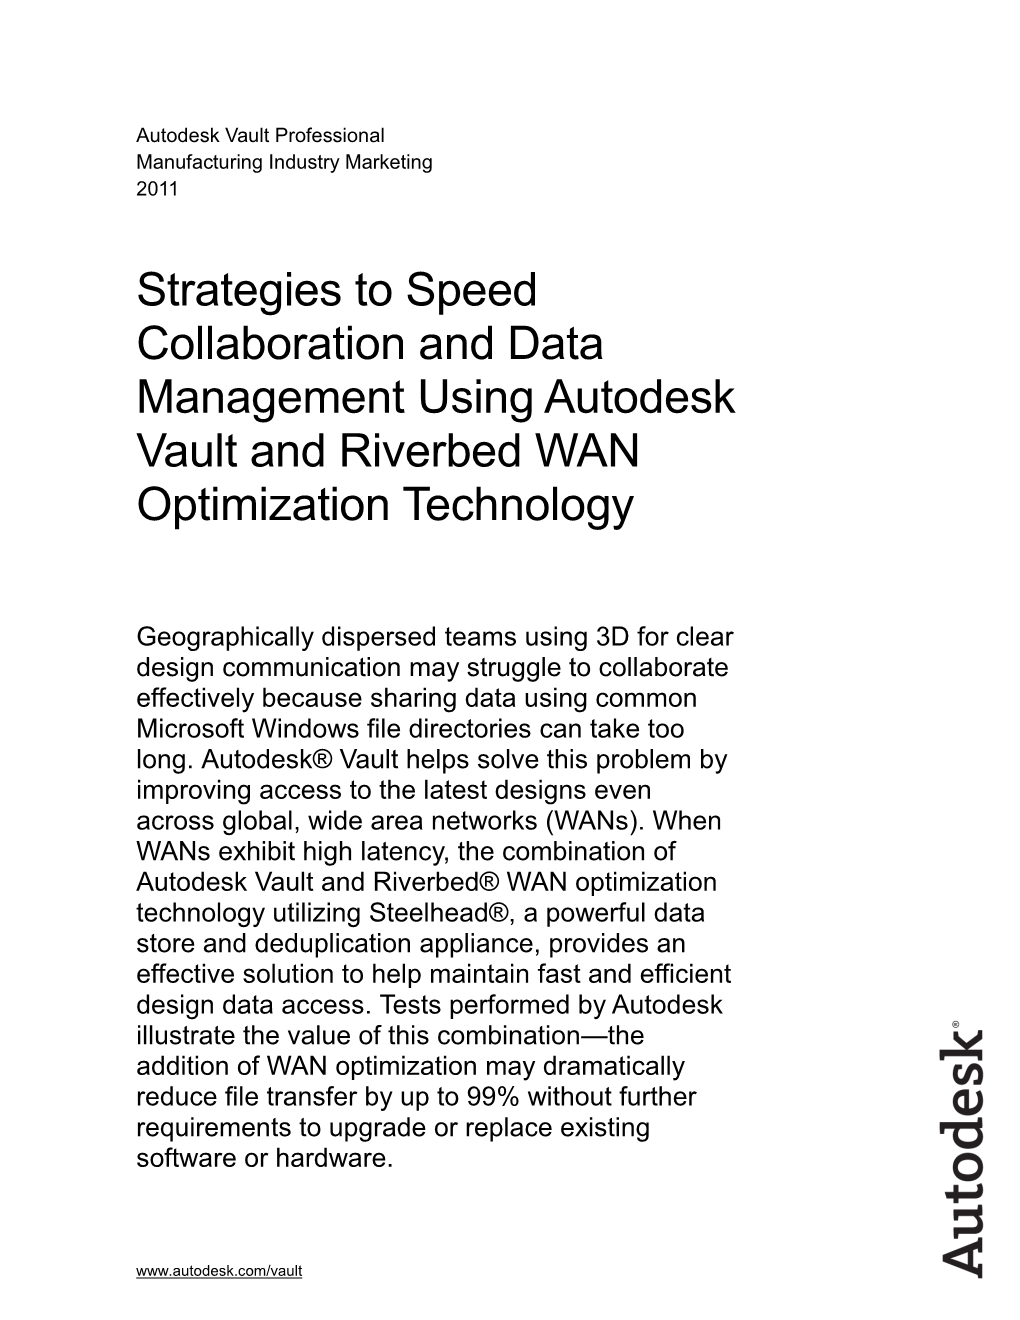 Strategies to Speed Collaboration and Data Management Using Autodesk Vault and Riverbed WAN Optimization Technology